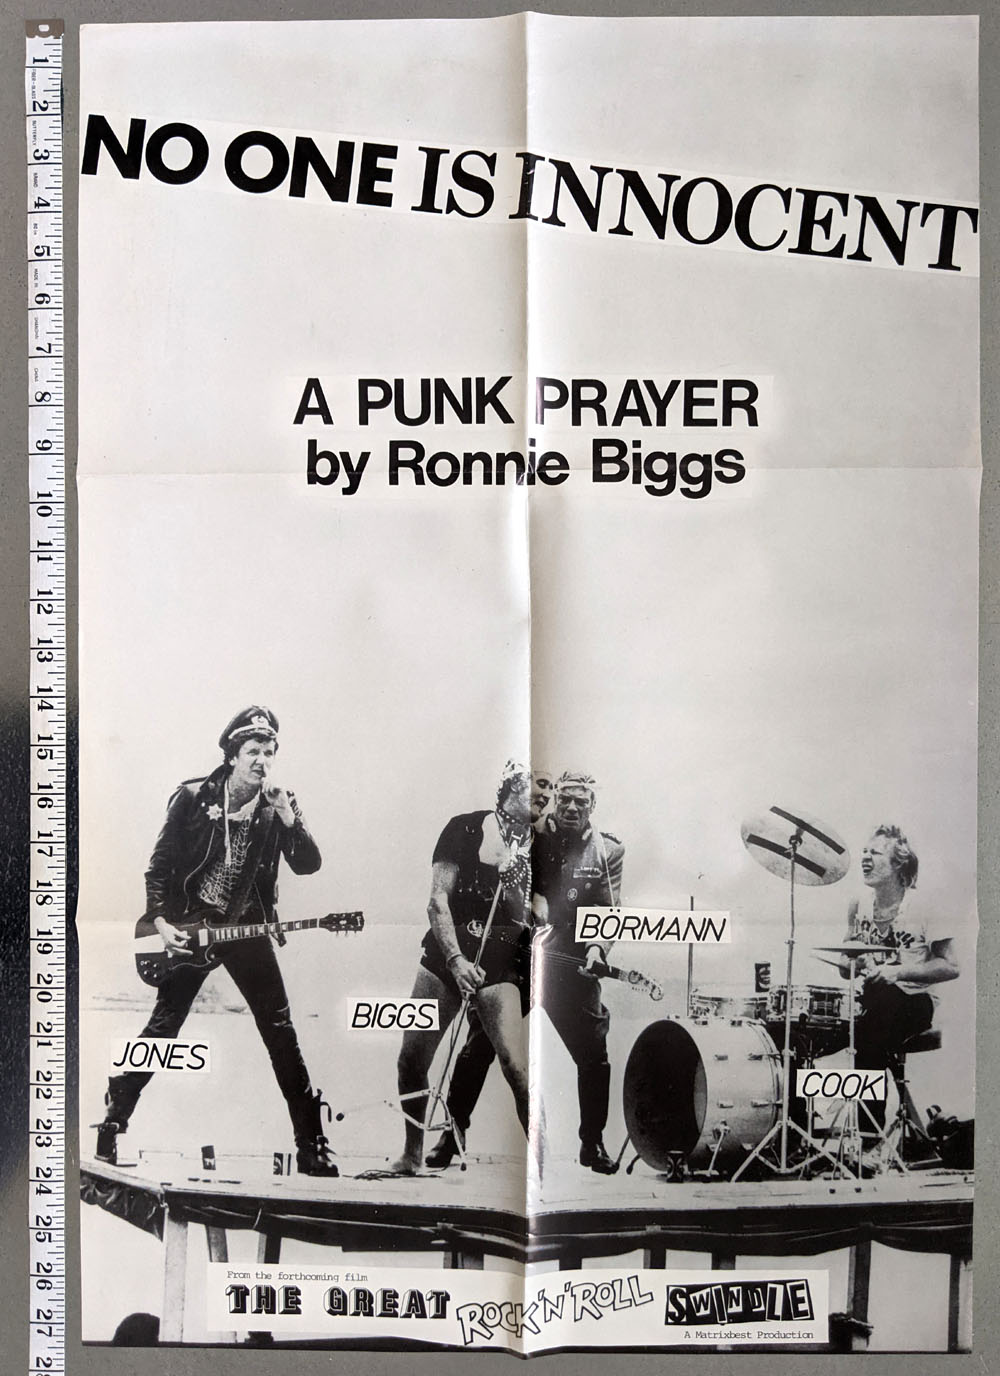 SEX PISTOLS "No One Is Innocent" POSTER